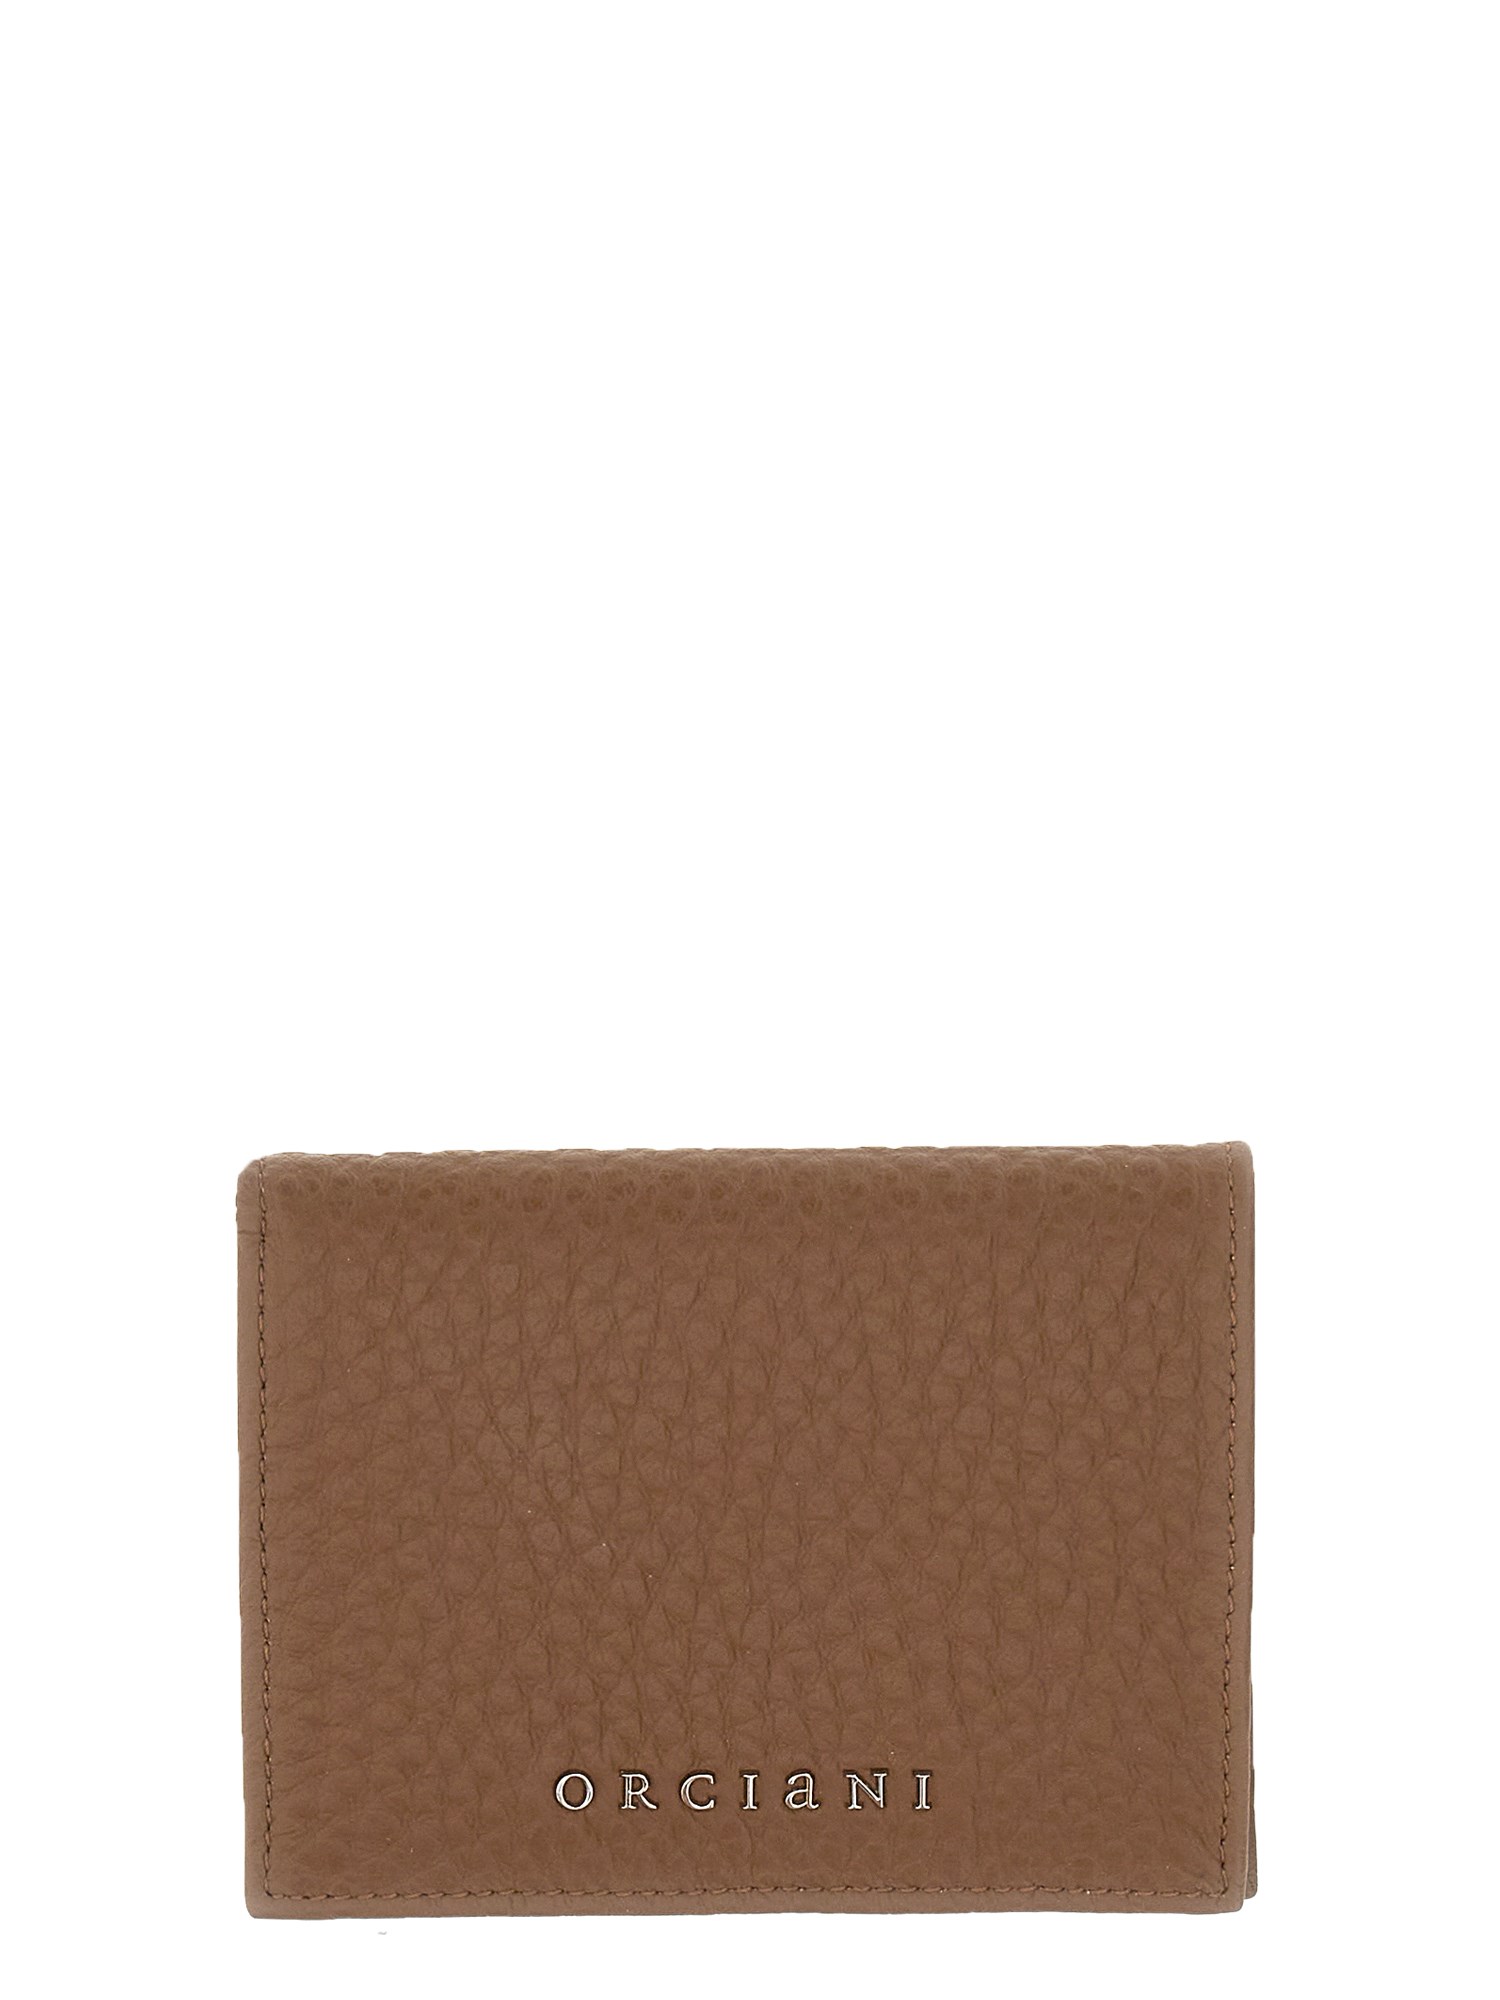 Orciani orciani soft leather wallet